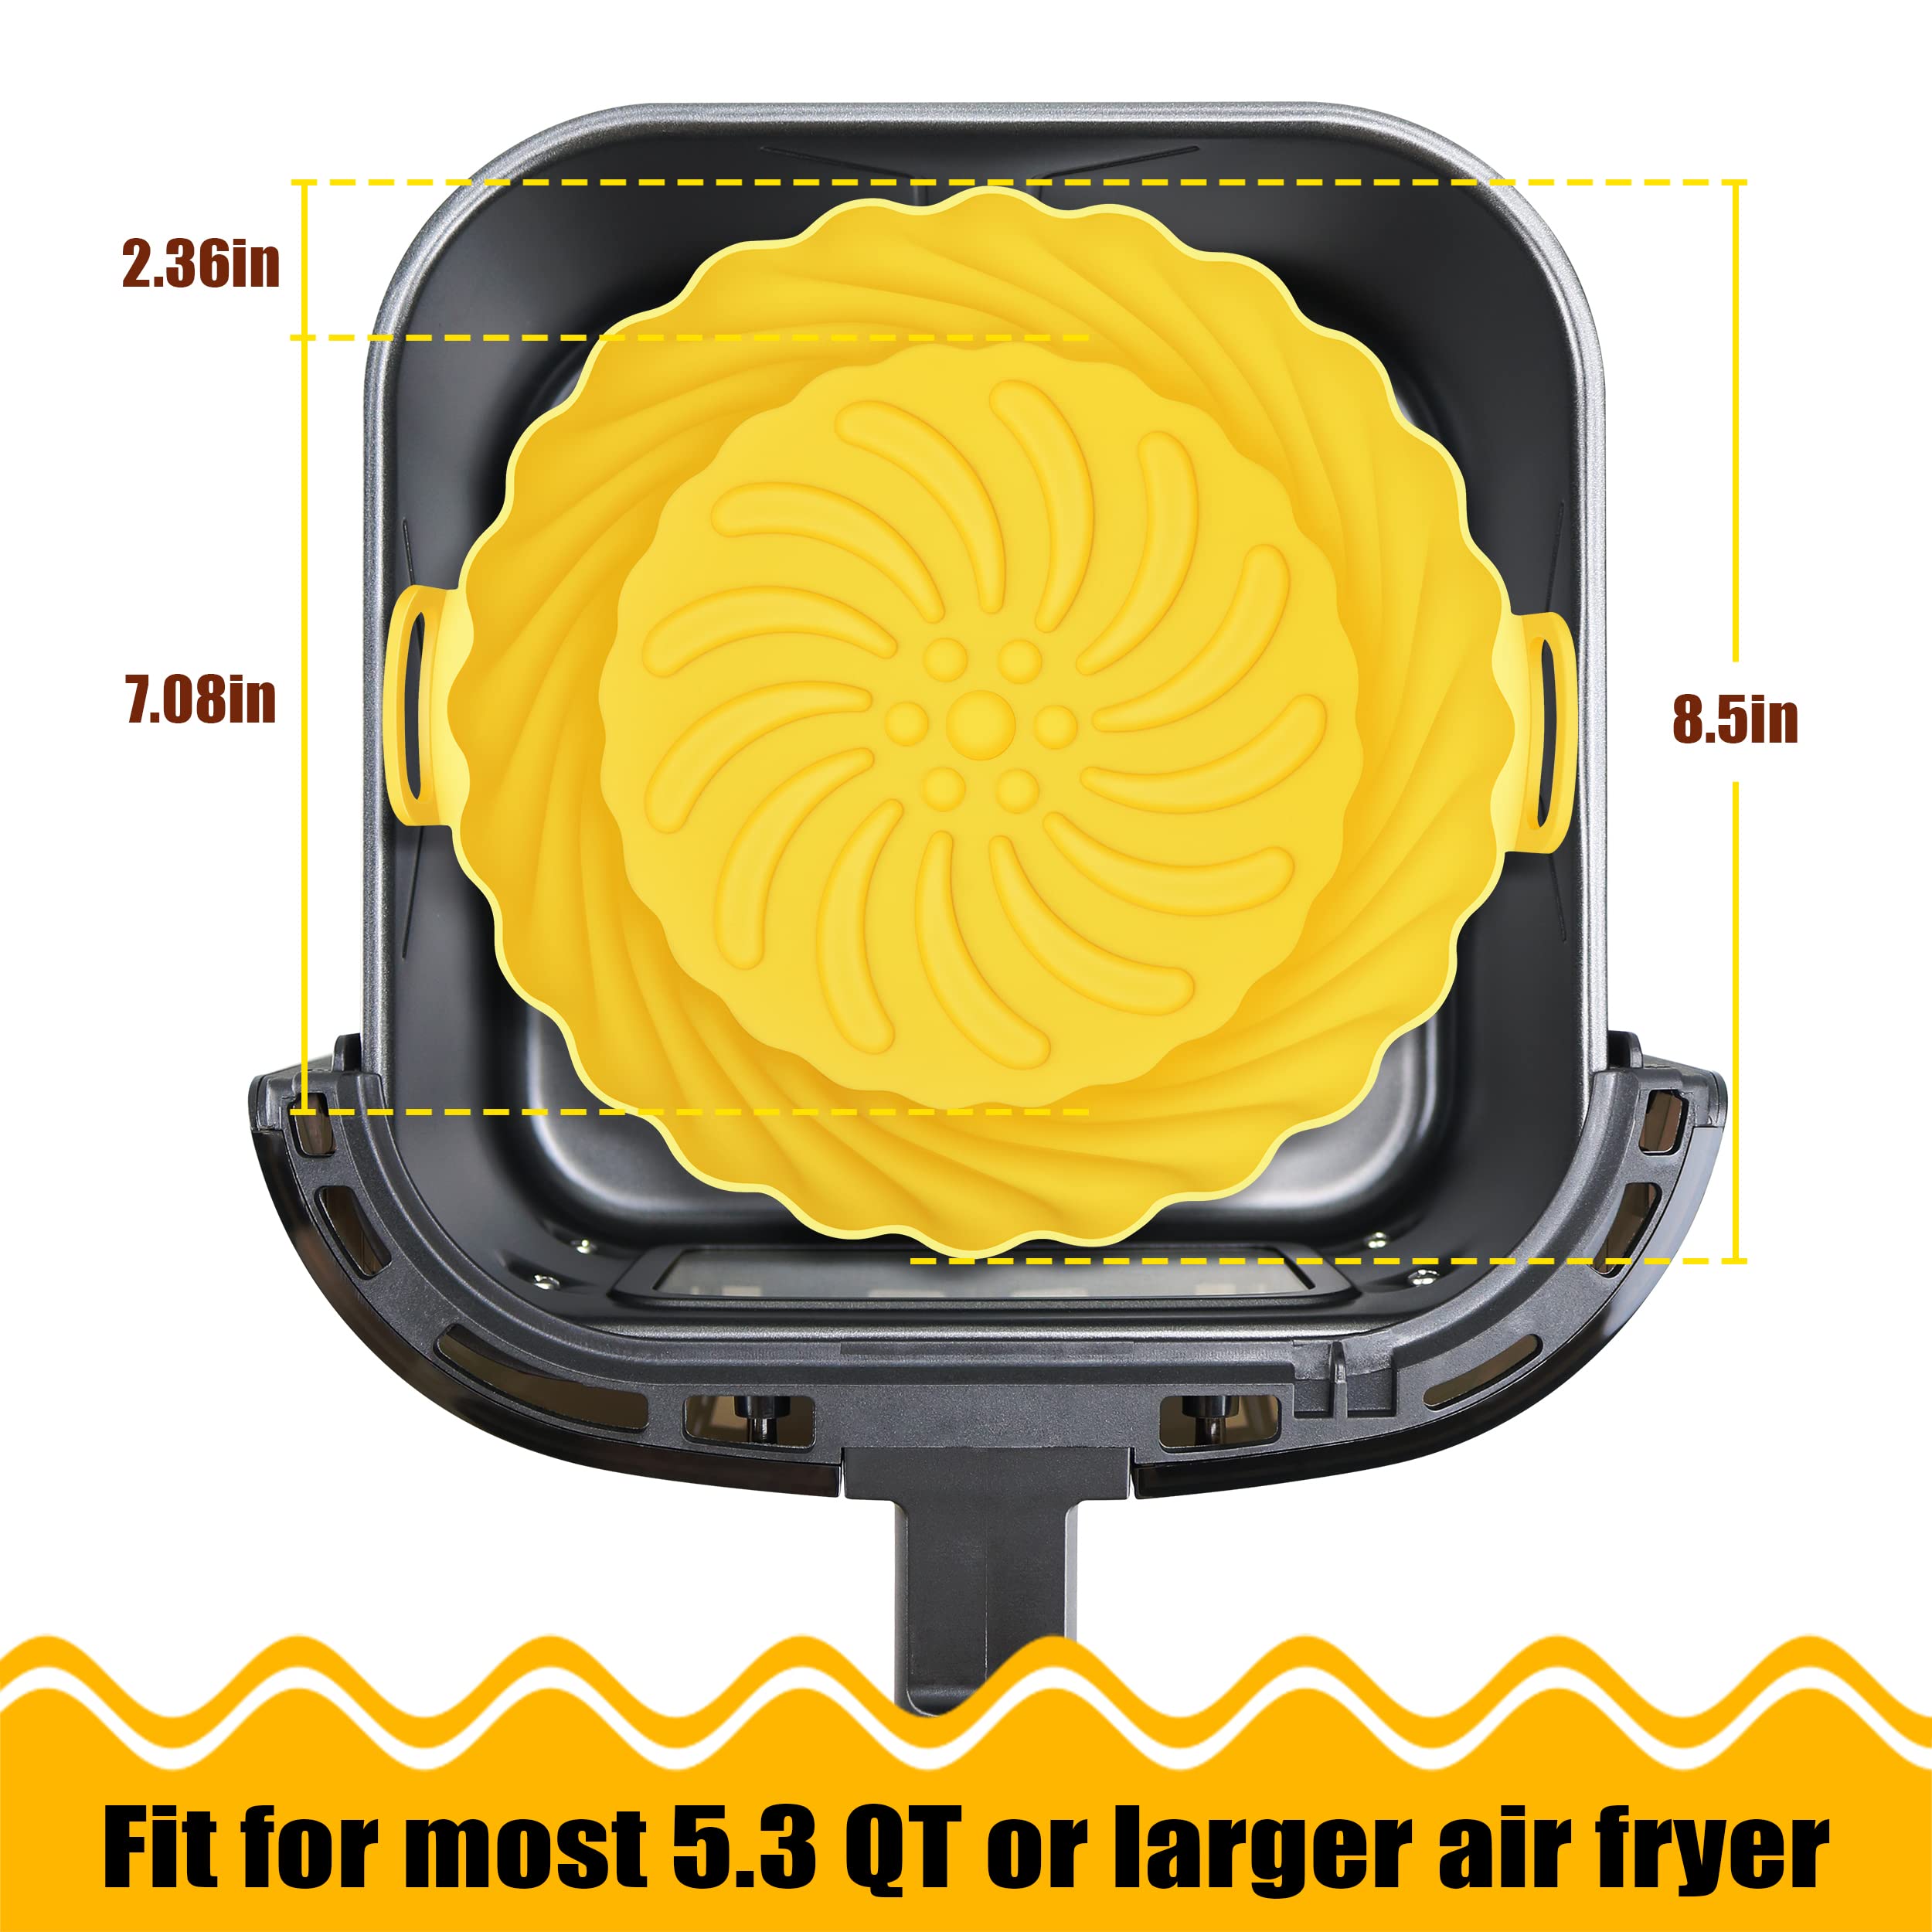 3Pack Air Fryer Silicone Pot,8.5 Inch Reusable Air Fryer Silicone Liners Replacement of Flammable Parchment Liner Paper, Easy Cleaning Air Fryer Oven Accessories Fits 5.3 QT or larger Air Fryer.